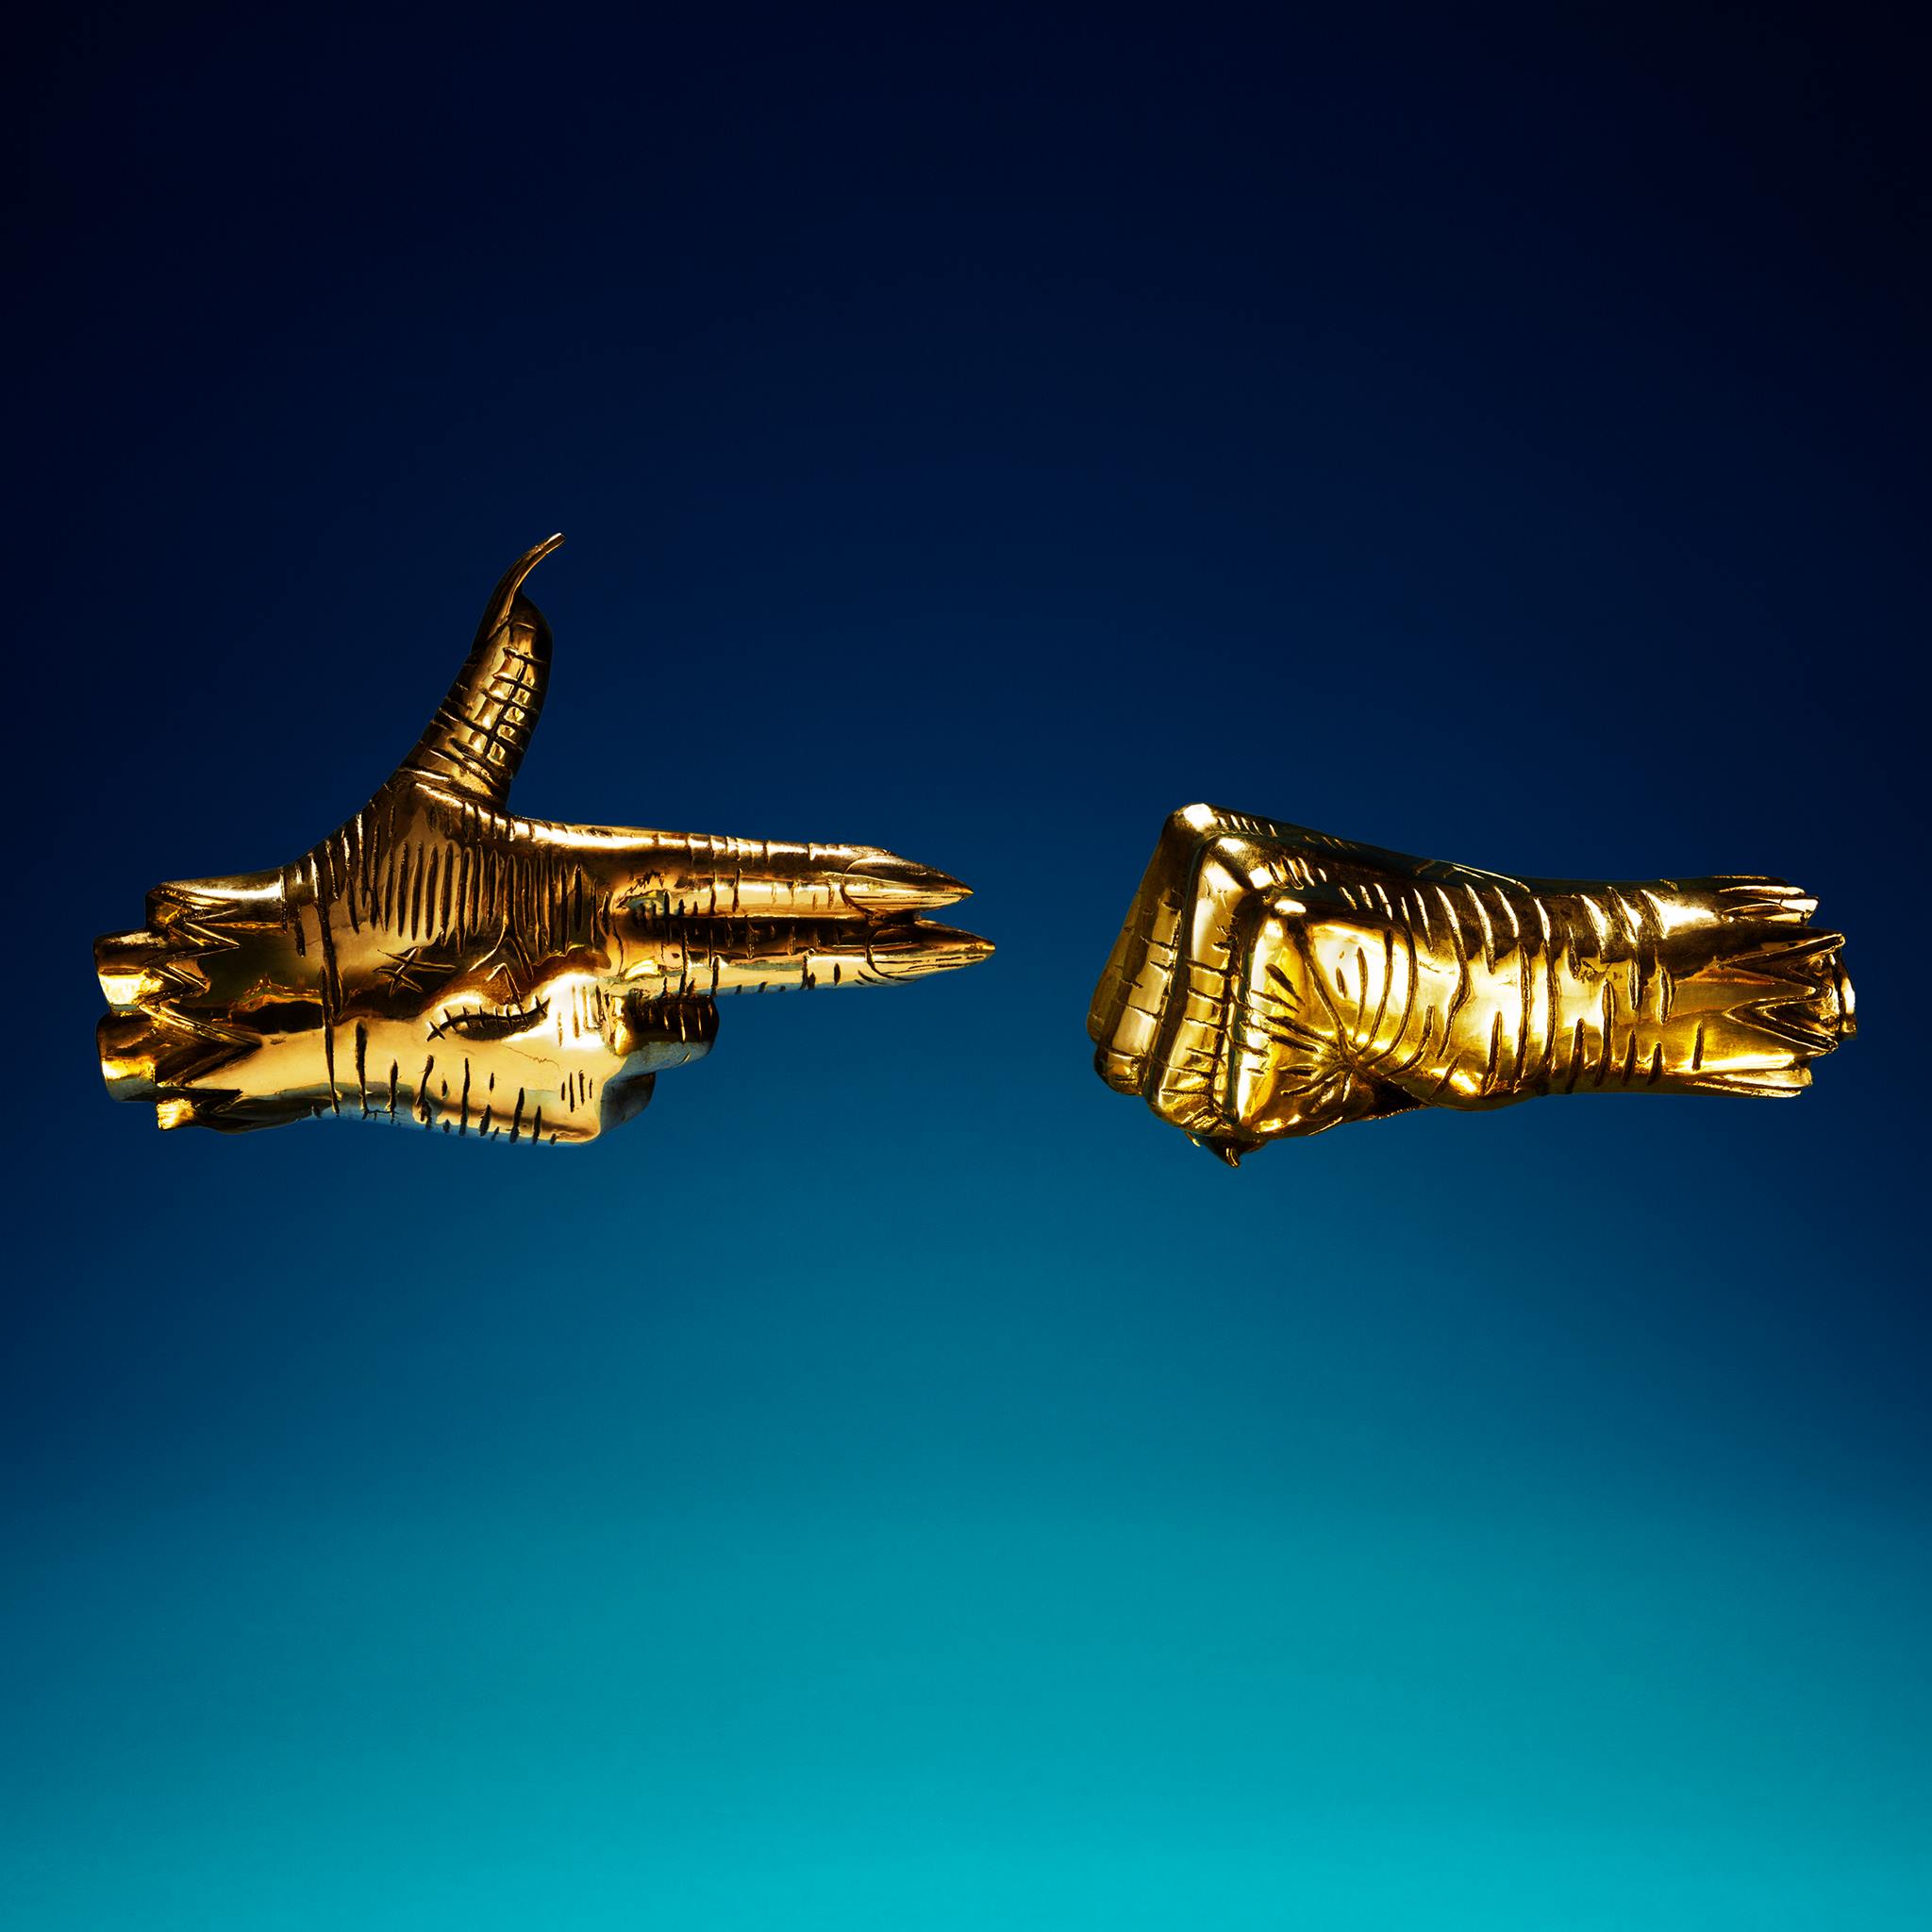 The Best of Run the Jewels